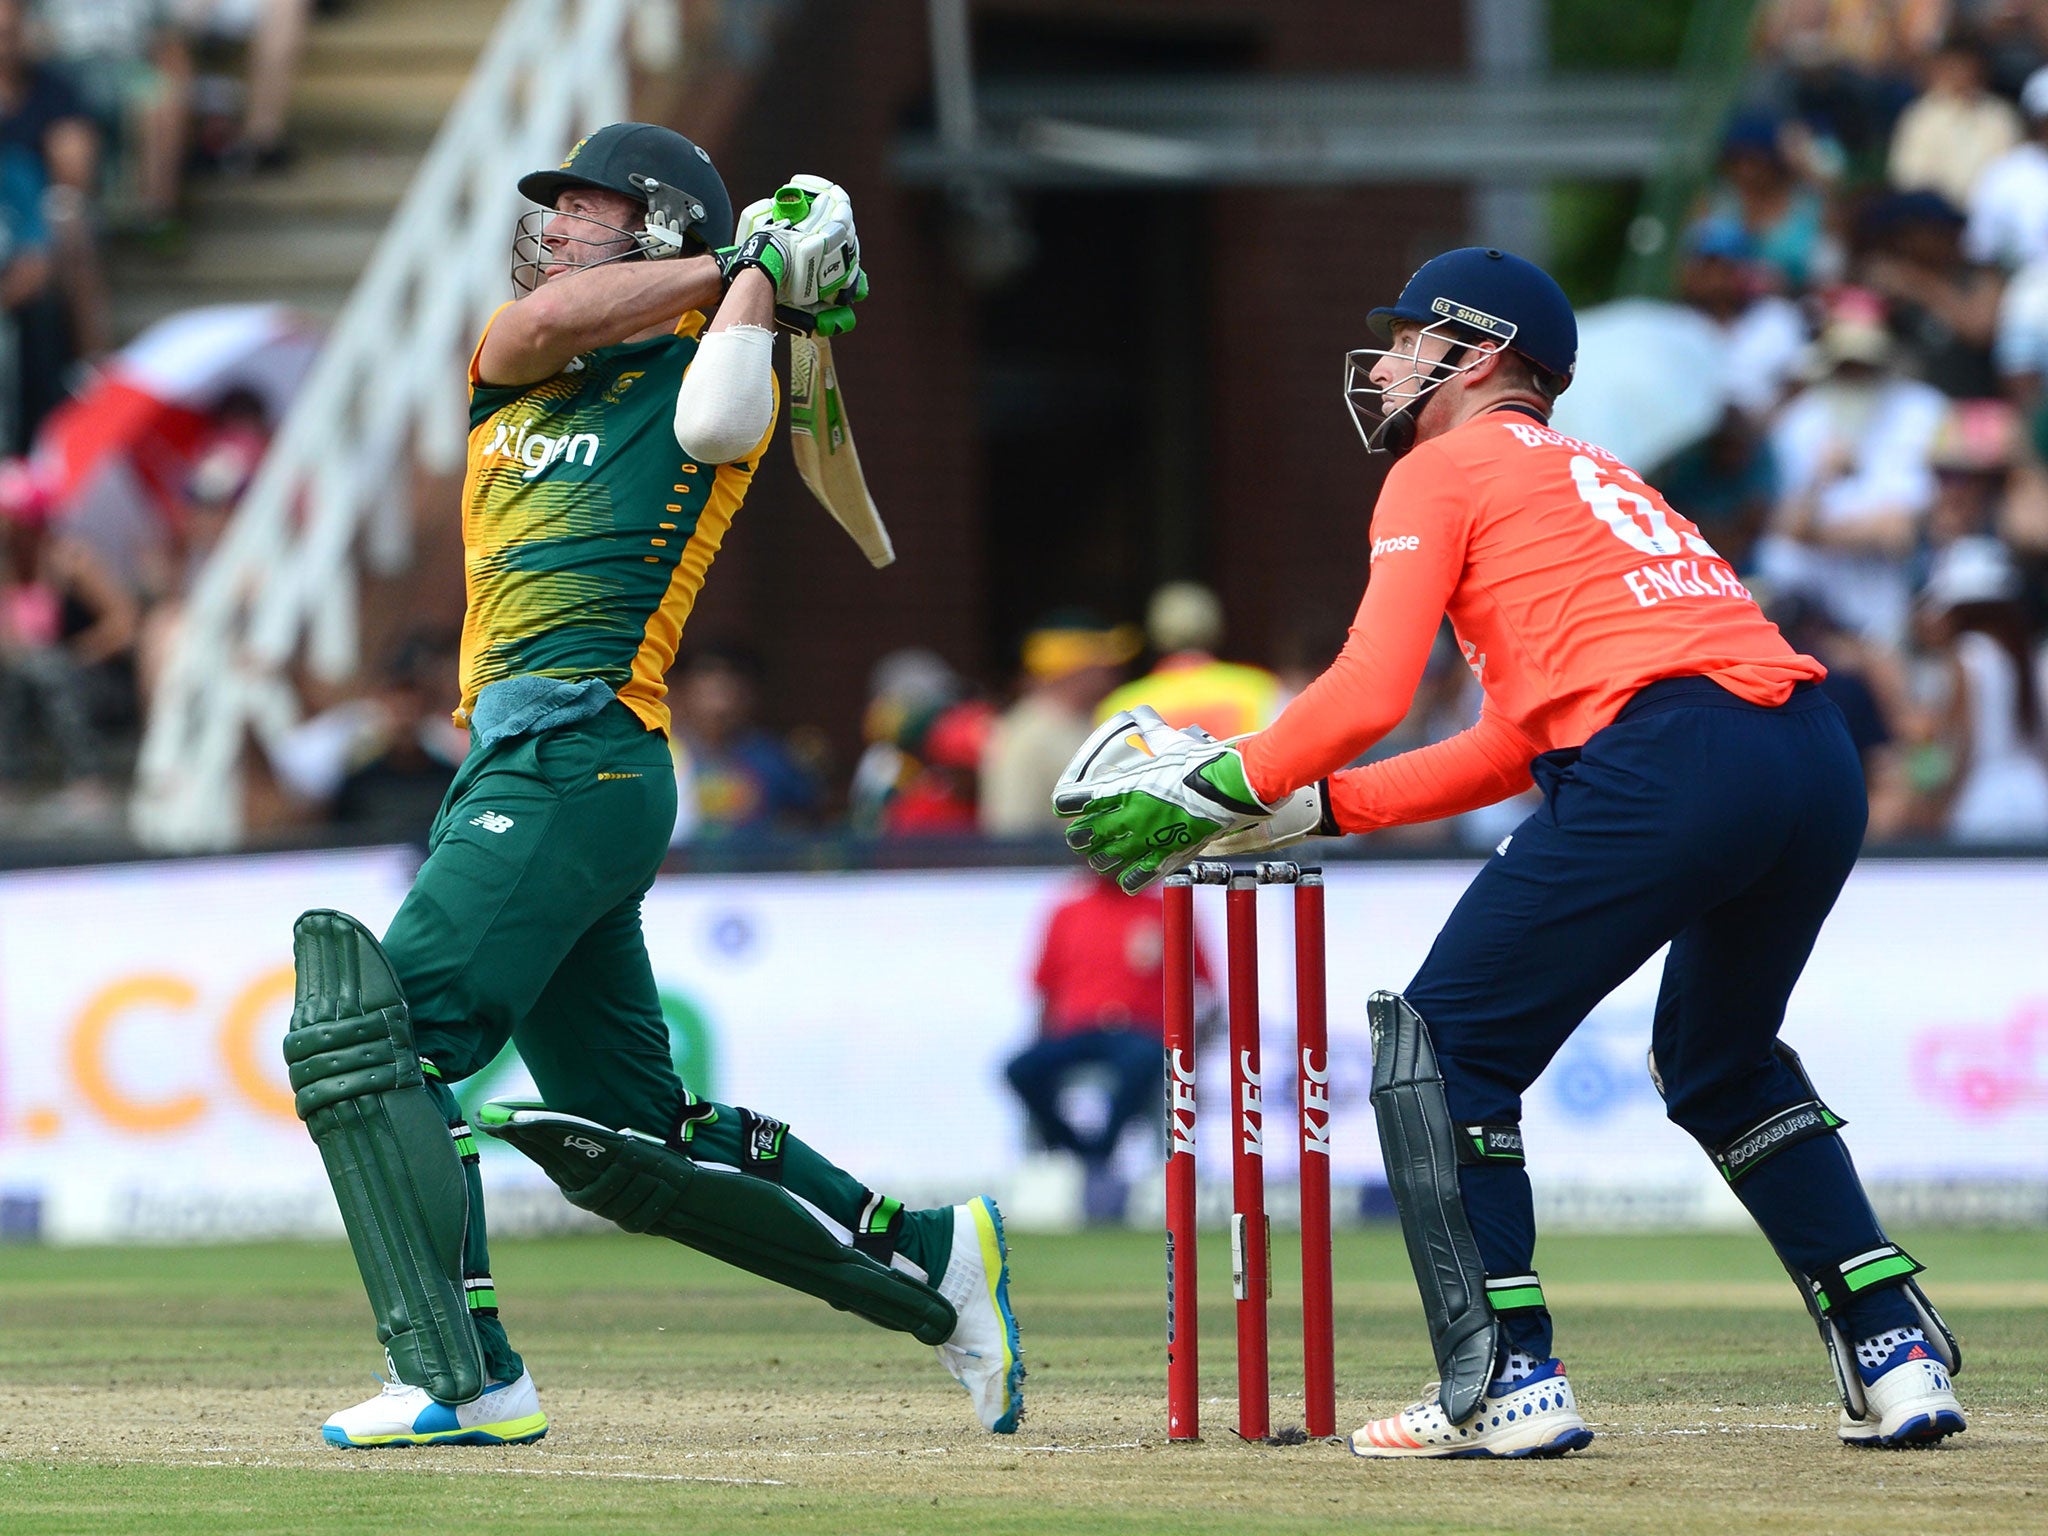 De Villiers hit a blistering 71 from 29 balls against England in 2016